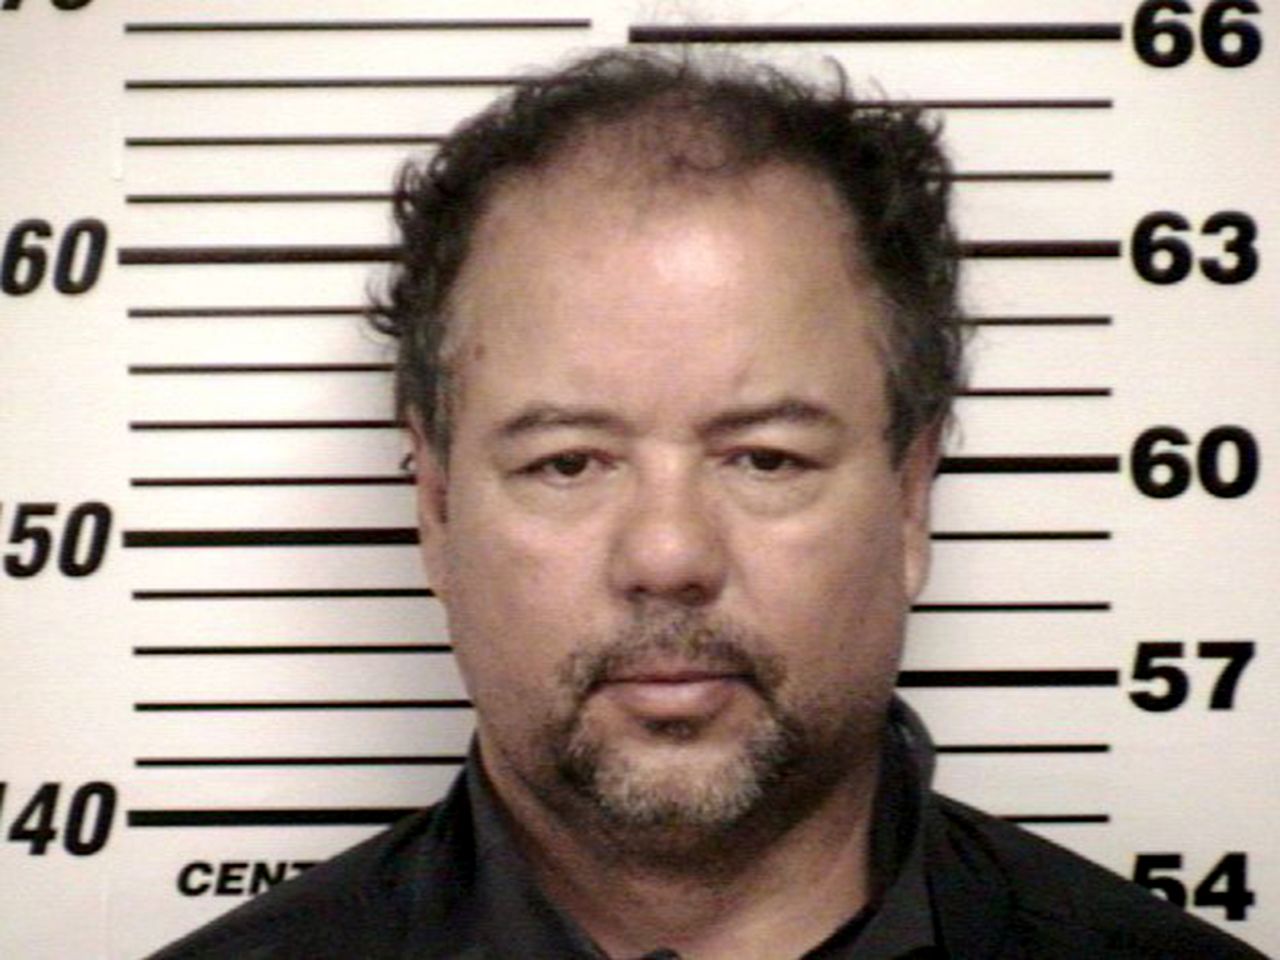 Ariel Castro was charged May 8 with kidnapping the three women.  He has pleaded not guilty to the 977 counts against him.